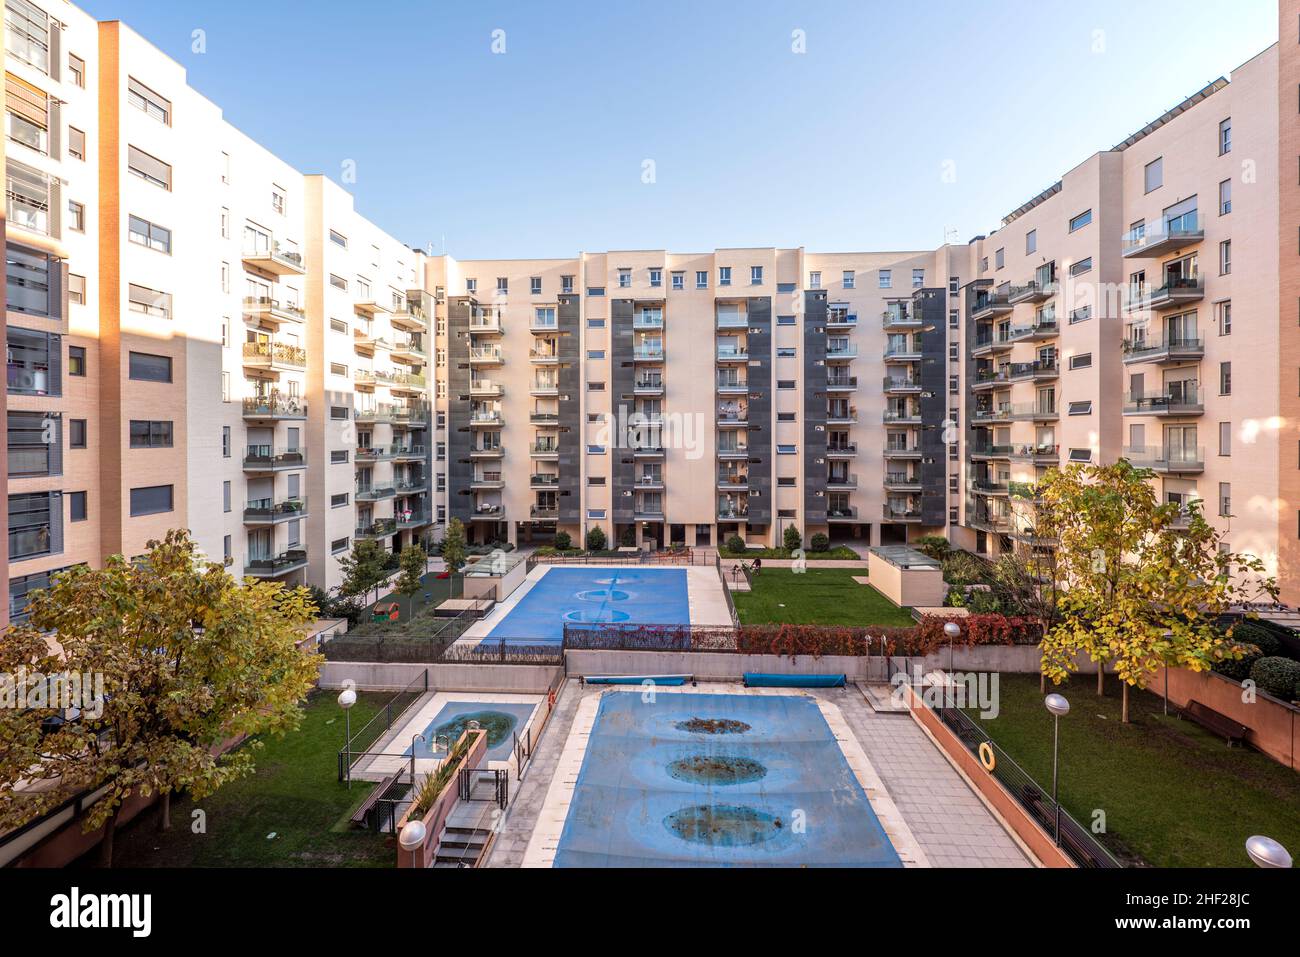 Interior facade of a block patio with communal pools covered with tarps Stock Photo